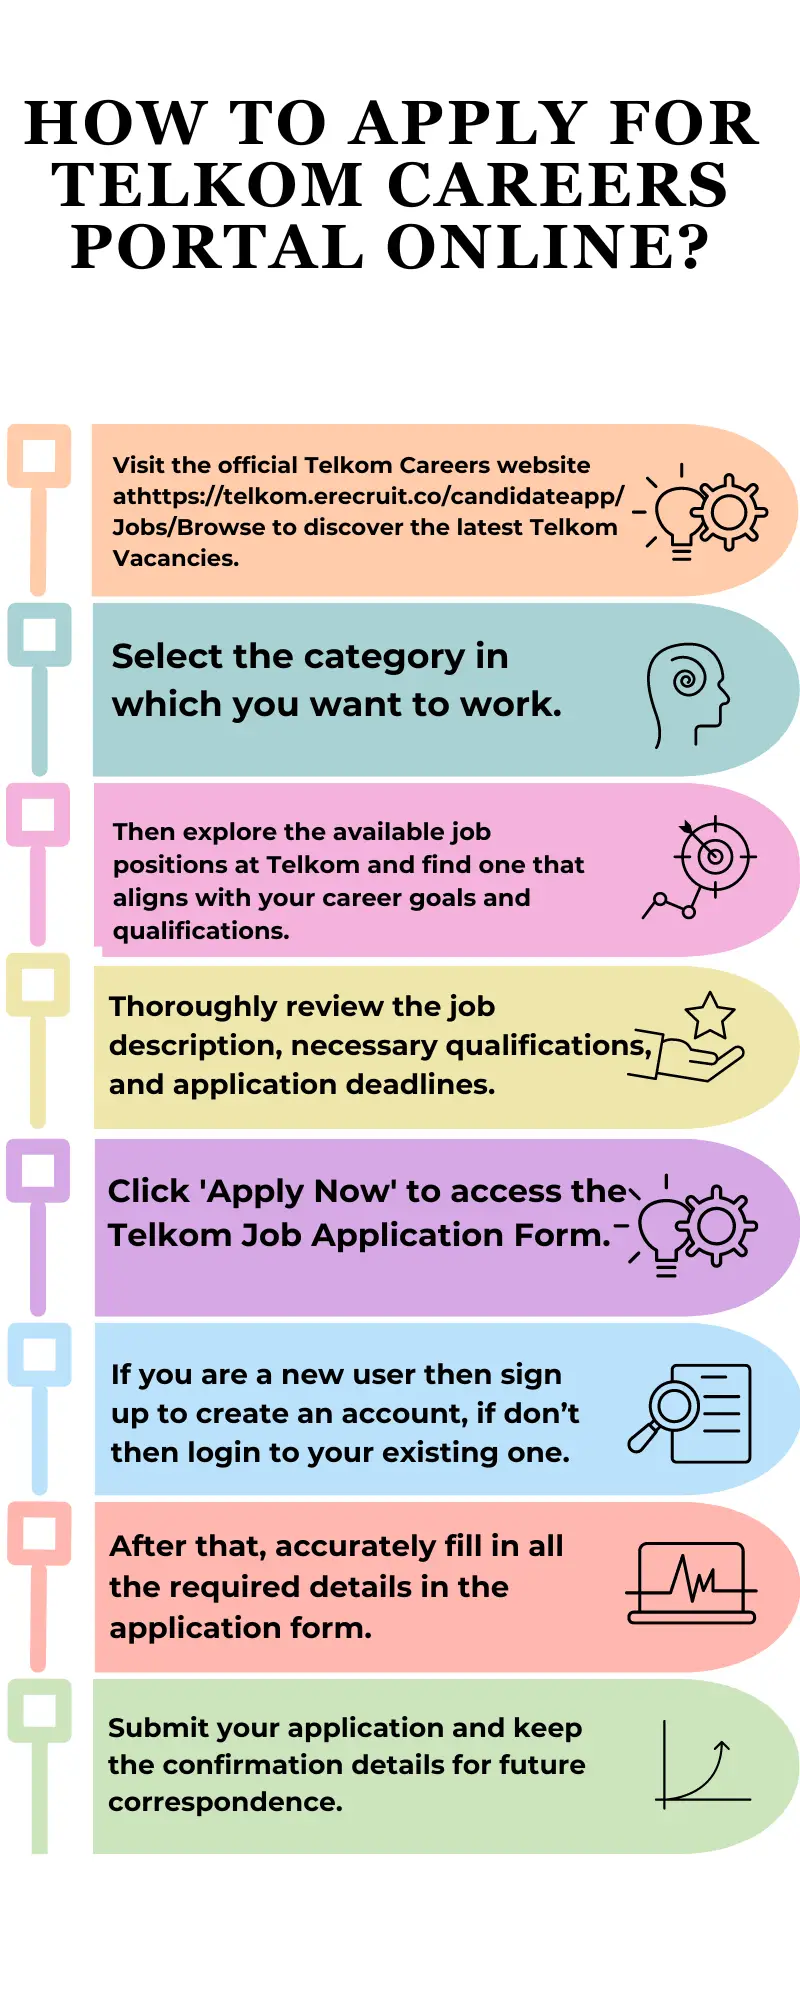 How To Apply for Telkom Careers Portal Online?